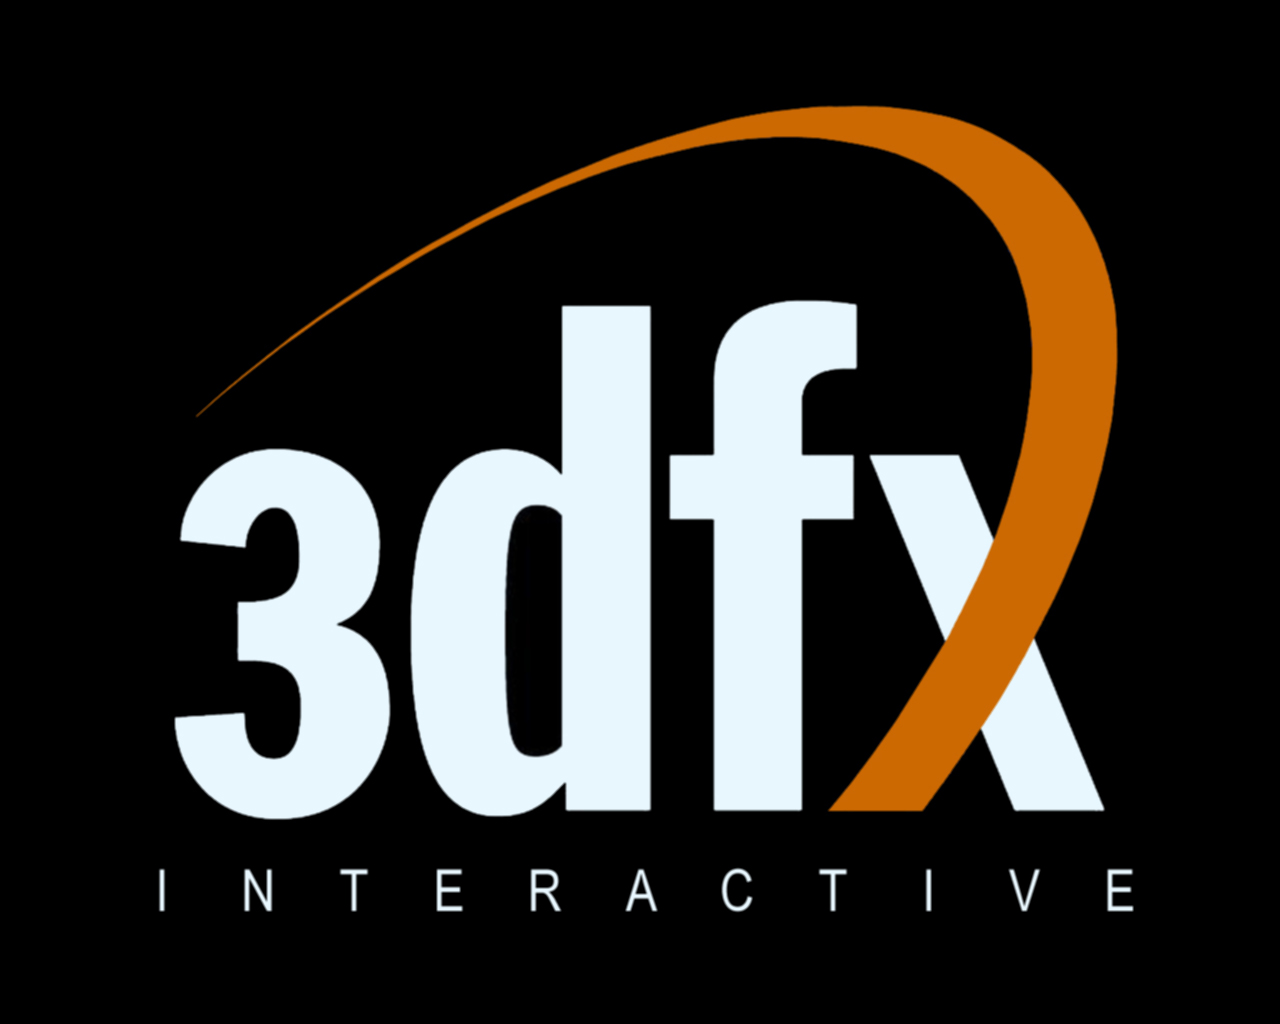 Media asset in full size related to 3dfxzone.it news item entitled as follows: A tribute to 3dfx: Eight years out of business @ PCGH | Image Name: news9220_1.jpg